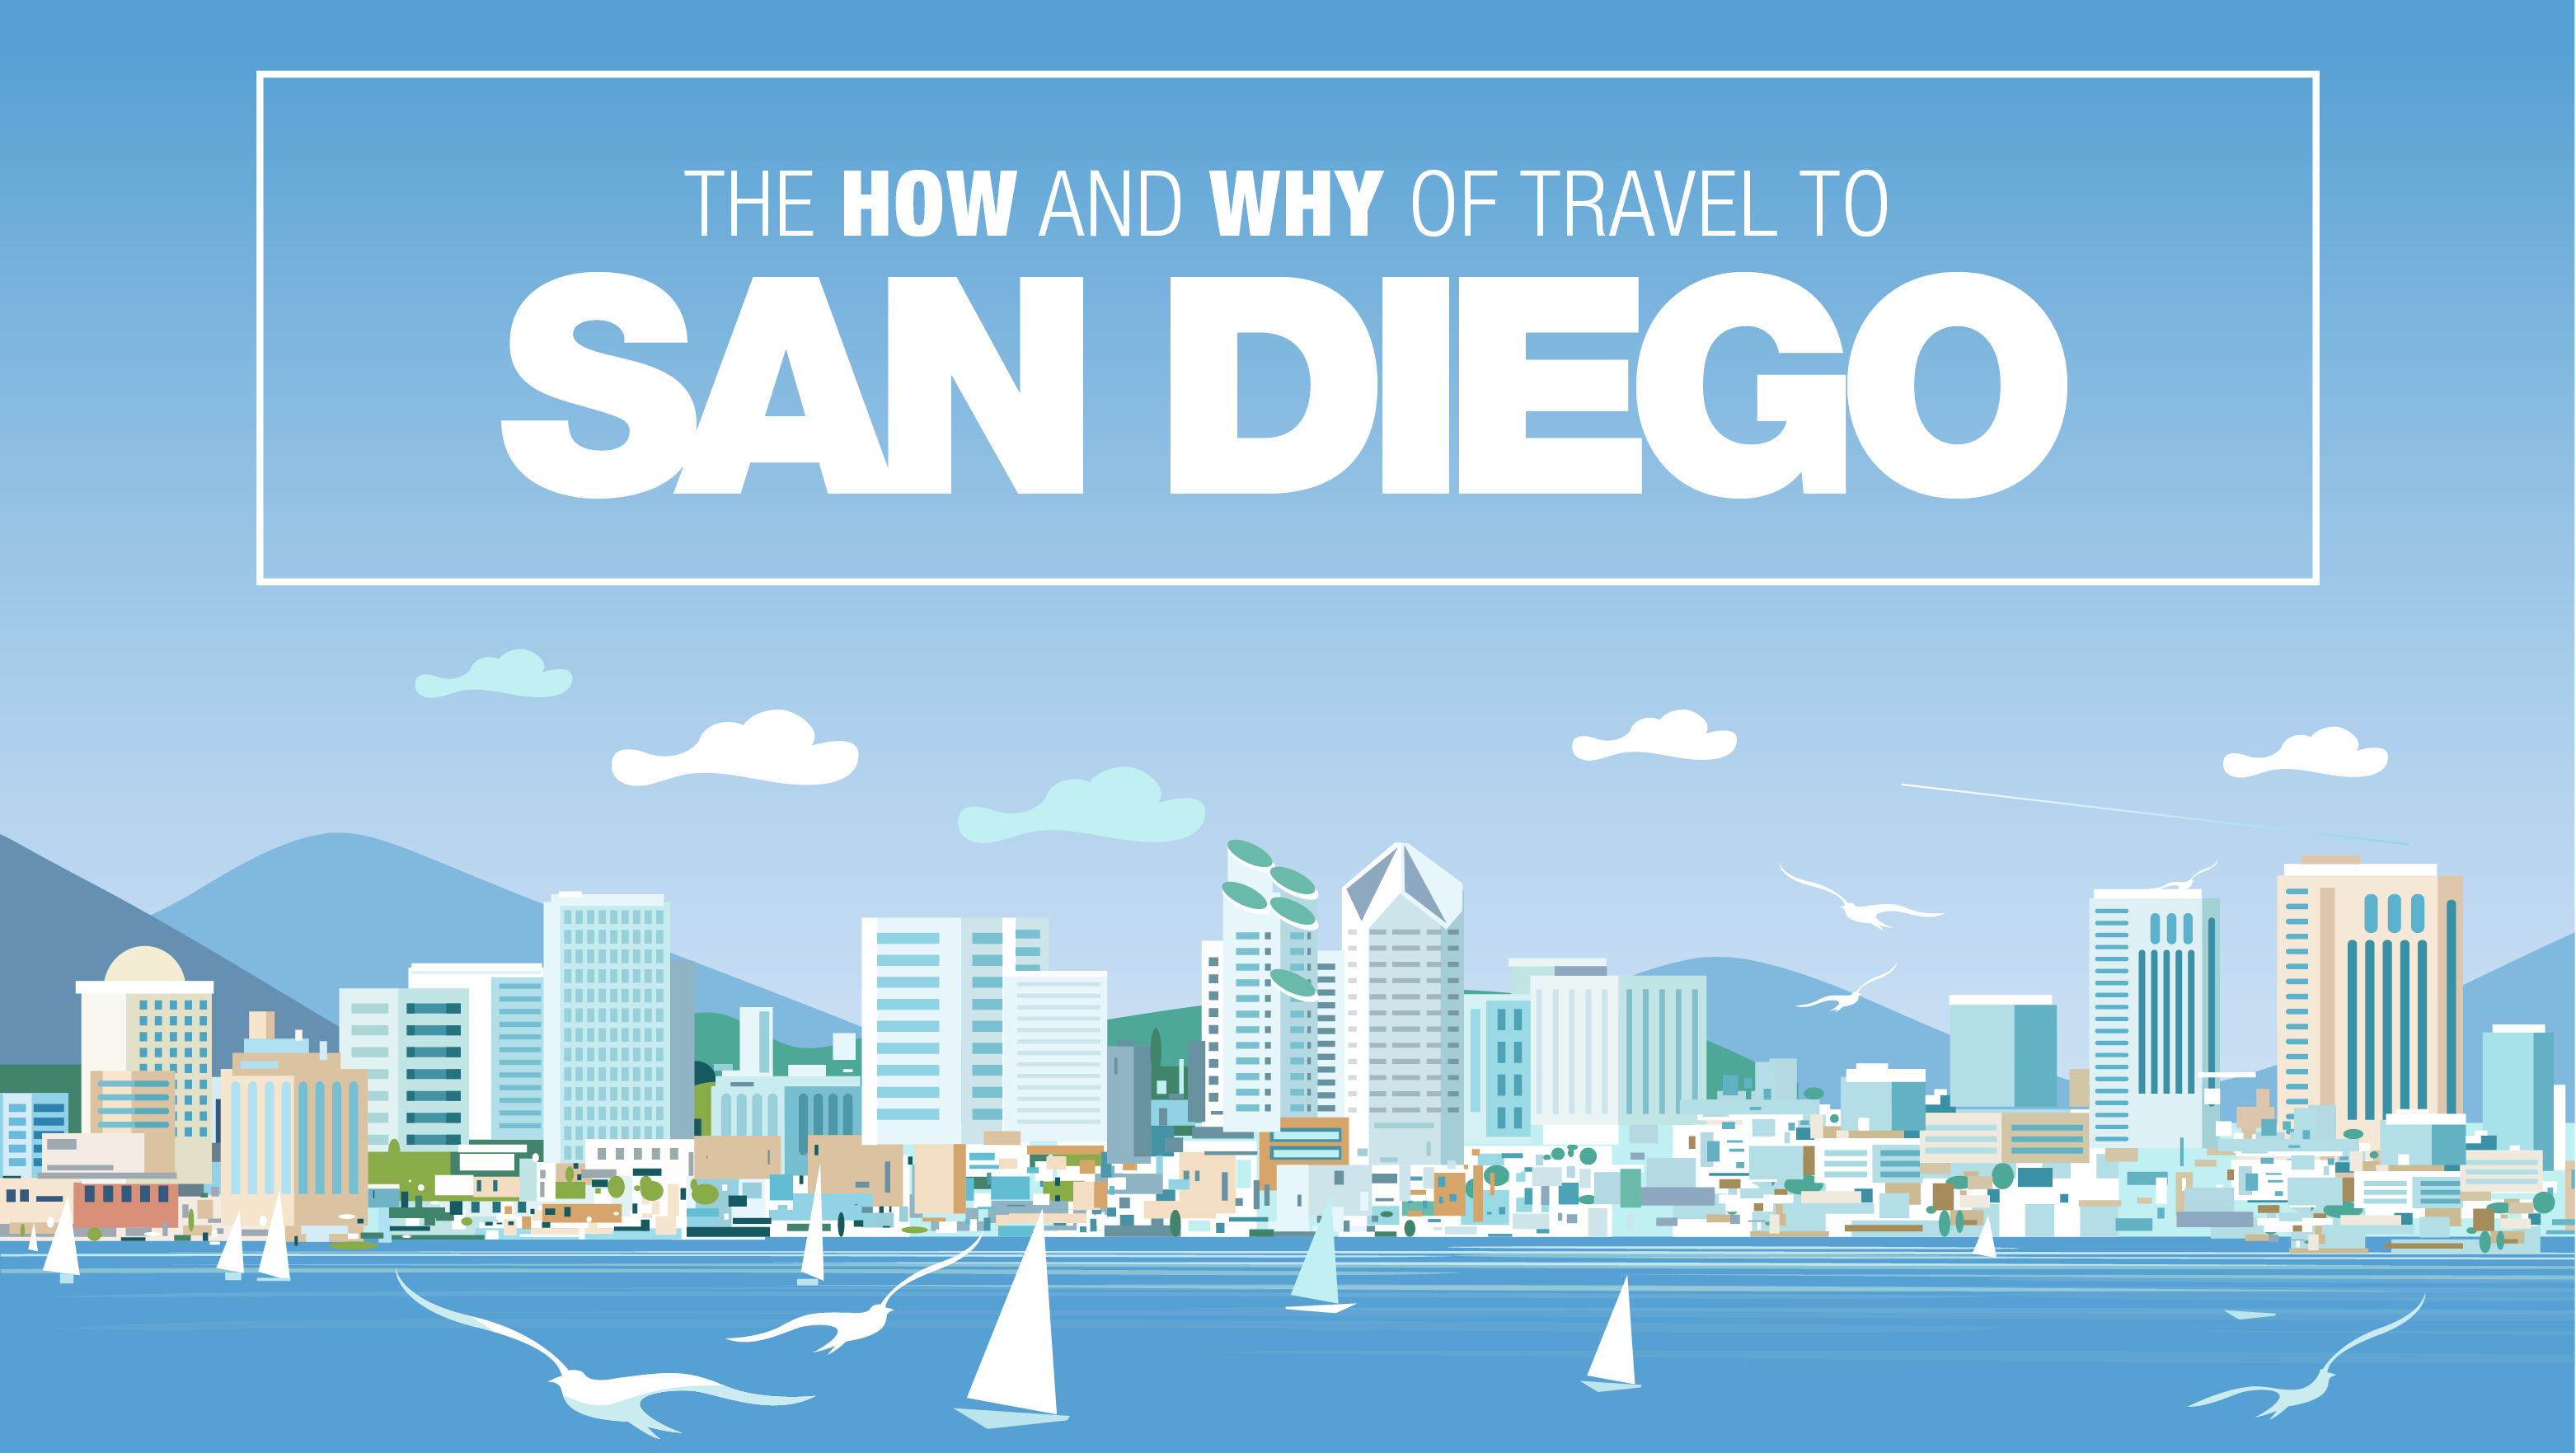 "The How and Why of Travel to San Diego" with San Diego skyline graphic